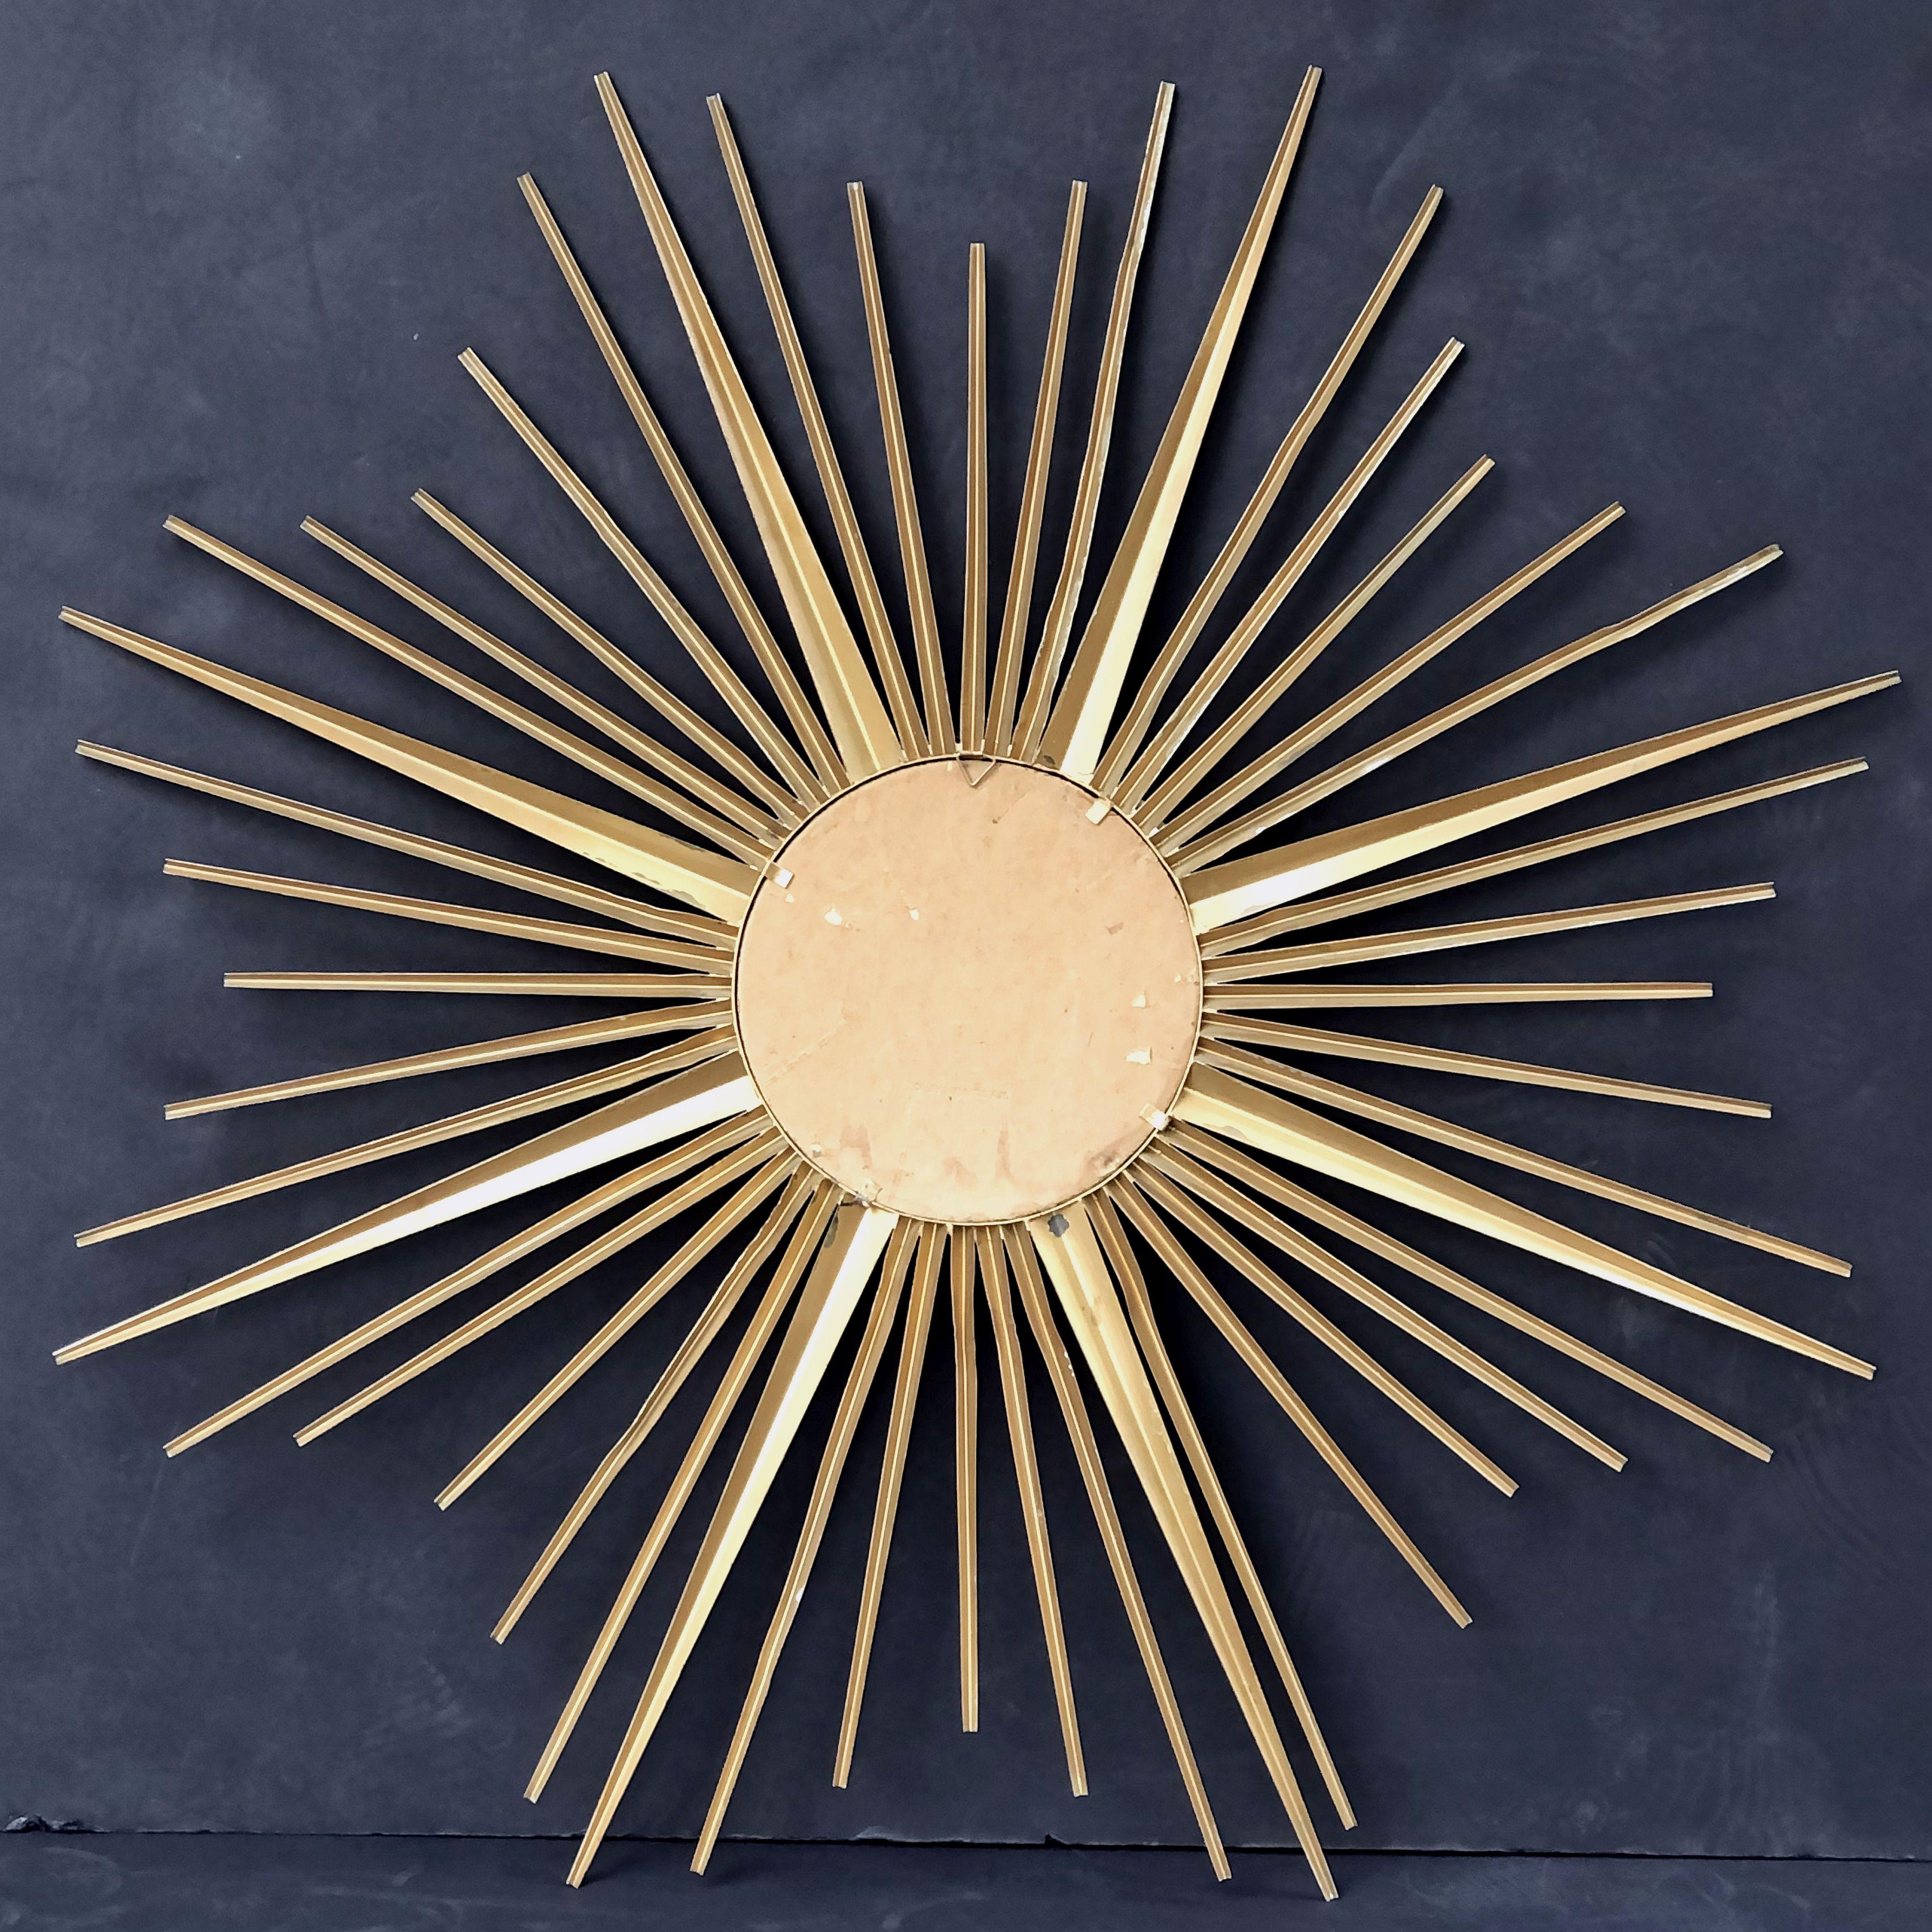 French Gilt Metal Sunburst or Starburst Mirror by Chaty Vallauris (Dia 33 3/4) For Sale 7